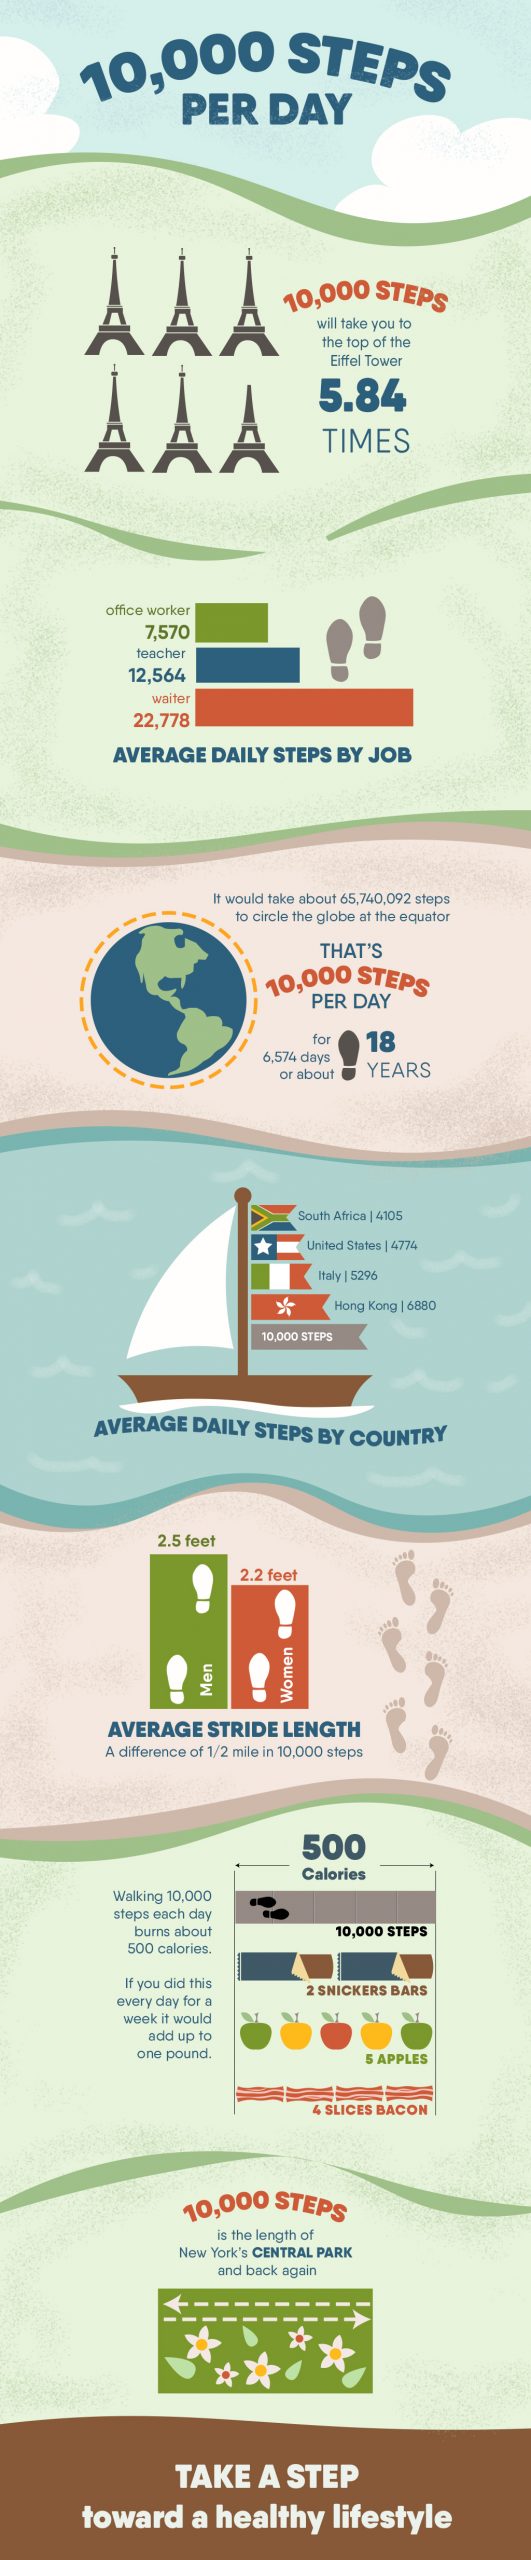 10,000 Steps Per Day Infographic